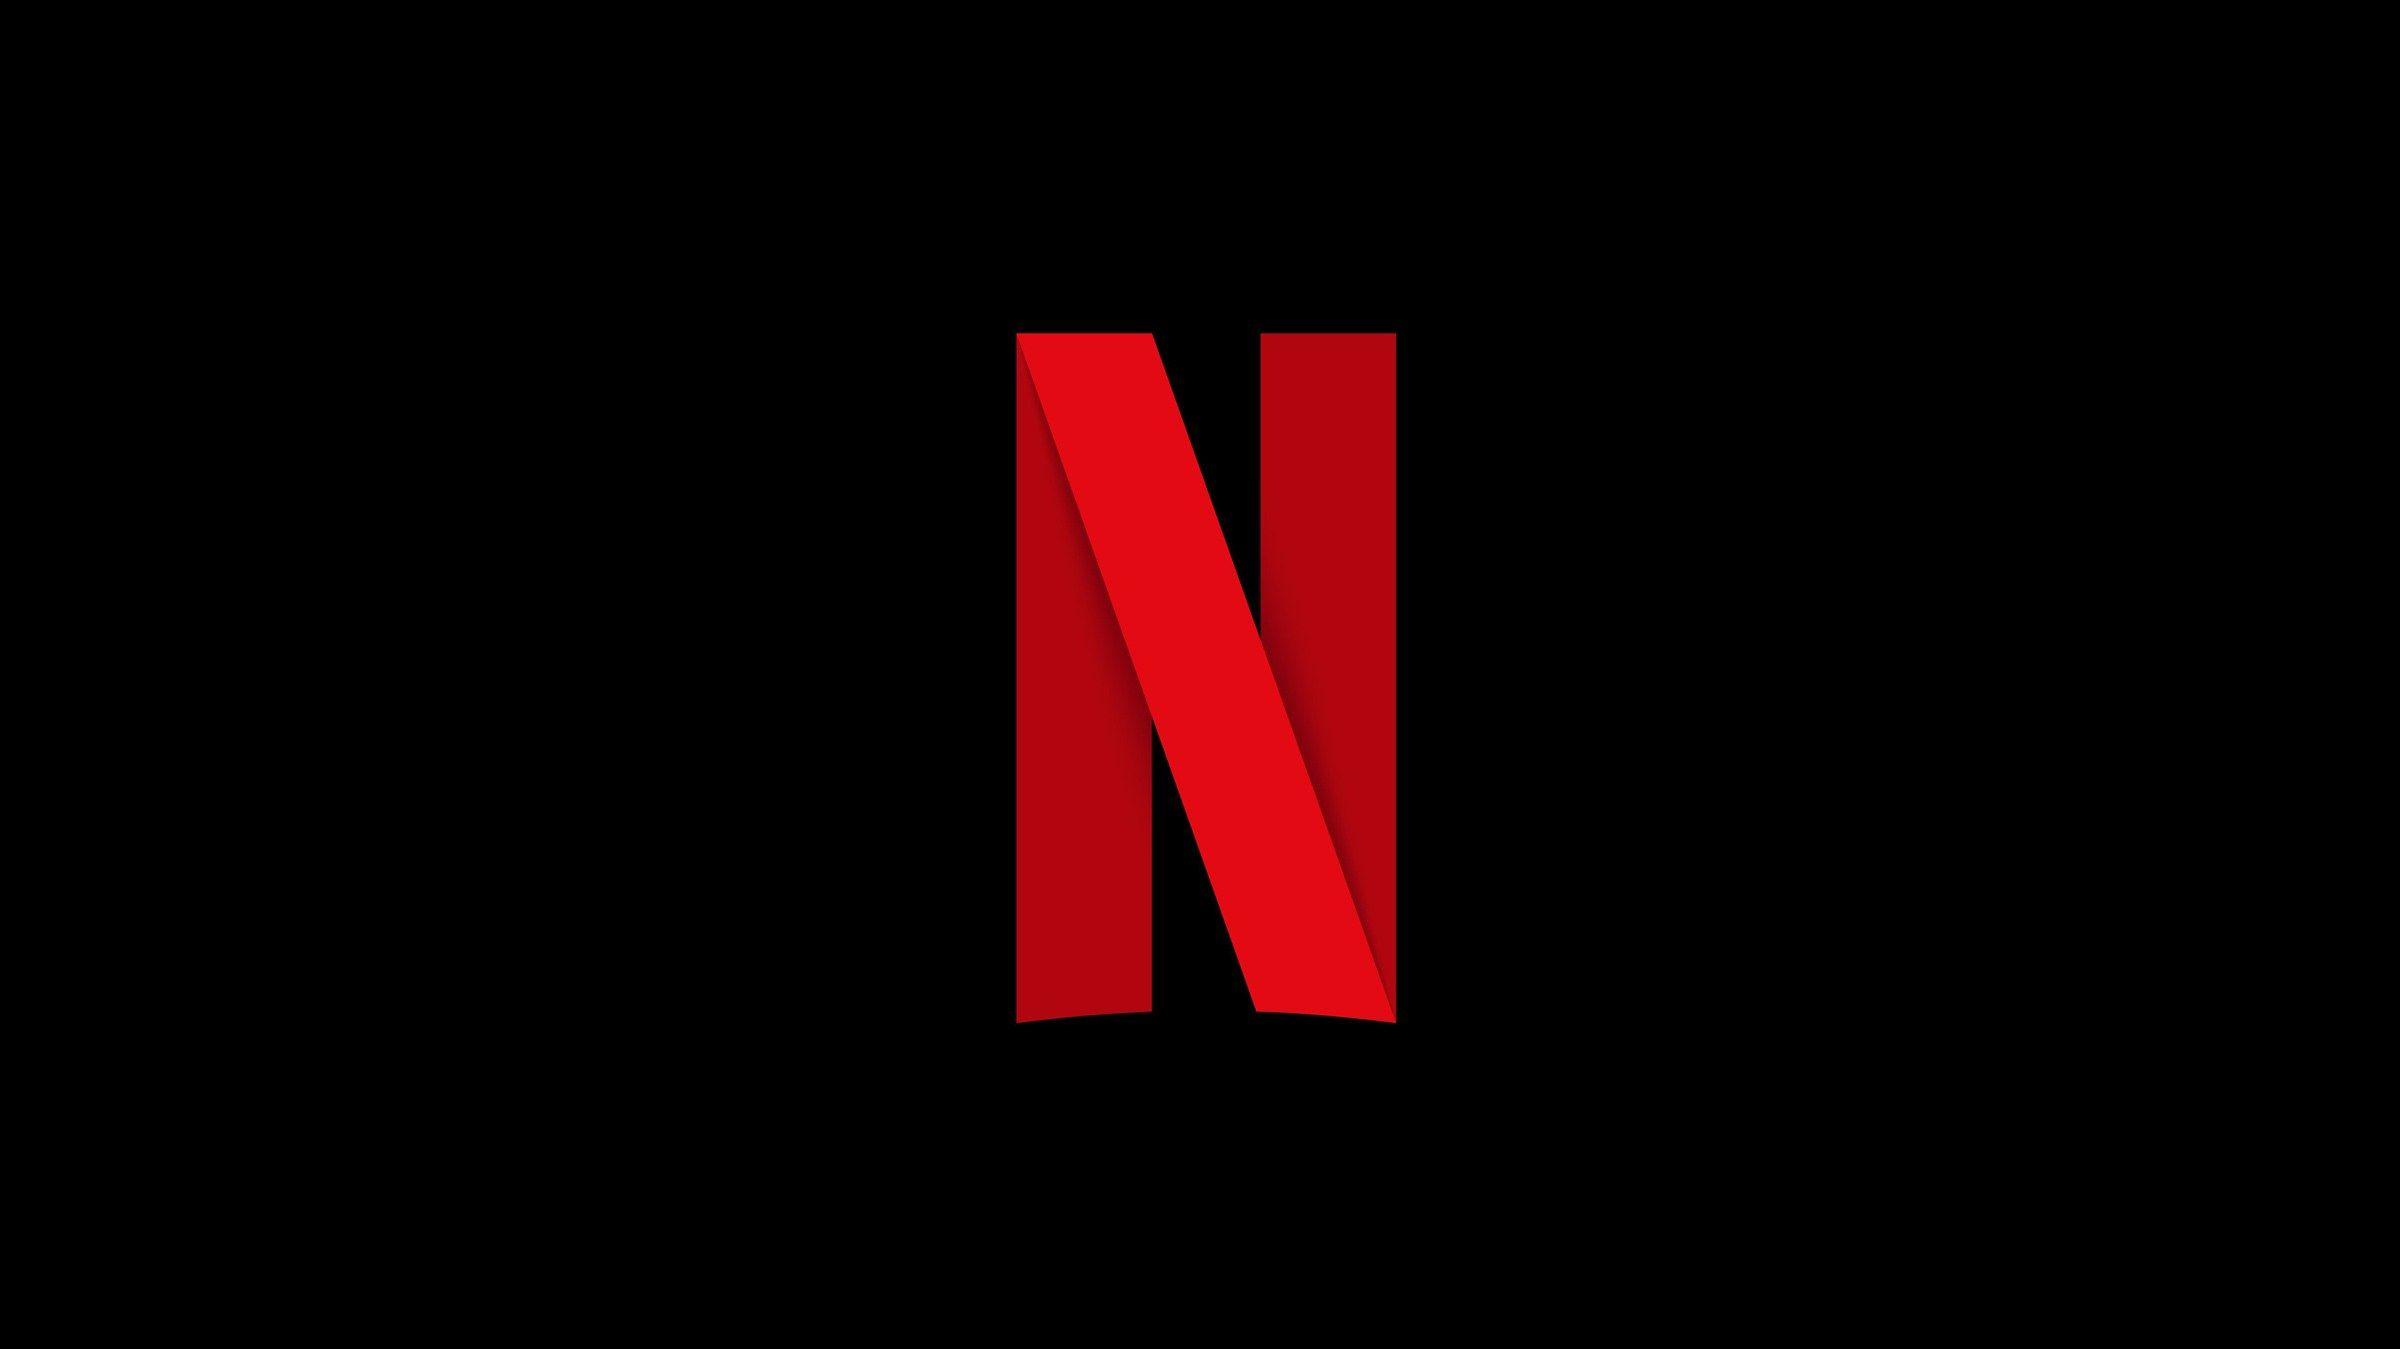 Netflix Letter Logo - Infographic: Netflix's New 'N' and the State of Logo Design | WIRED